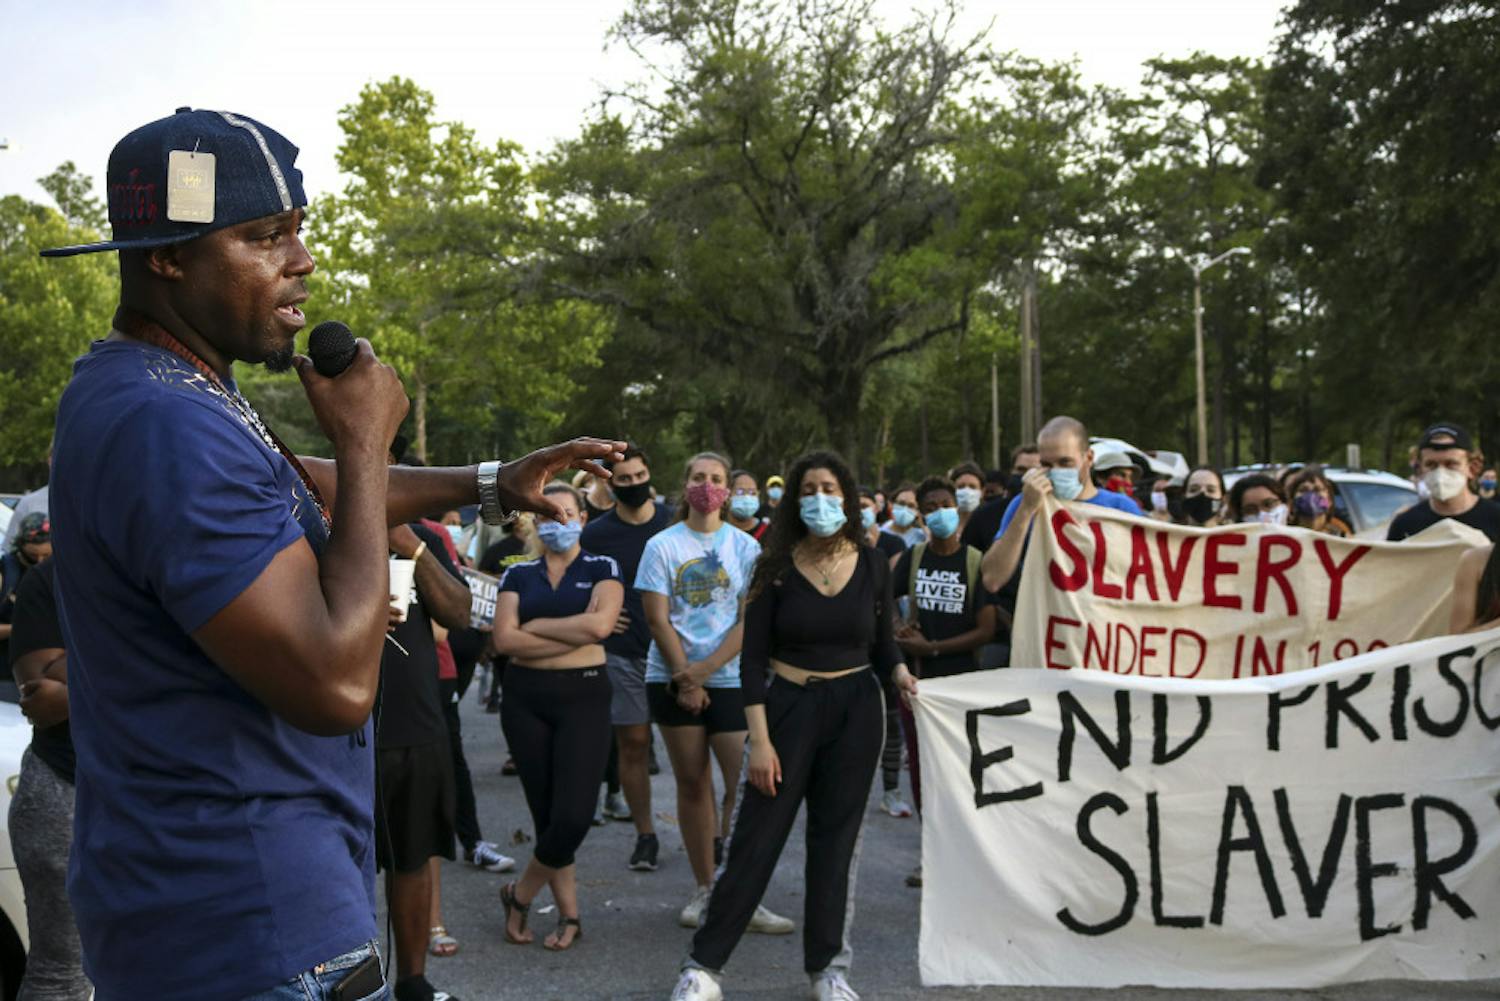 On June 19, about 150 people gathered outside of the Alachua County Jail to protest mass incarceration, police brutality and observe Juneteenth. ⁣
“This is the physical embodiment of all those injustices,” said Maria Dozier, a 20-year-old UF sustainability in the built environment senior. “This is a big, concrete building holding people inside that are supposed to be getting reformed, but instead they’re suffering from police brutality and other injustices every day.”⁣